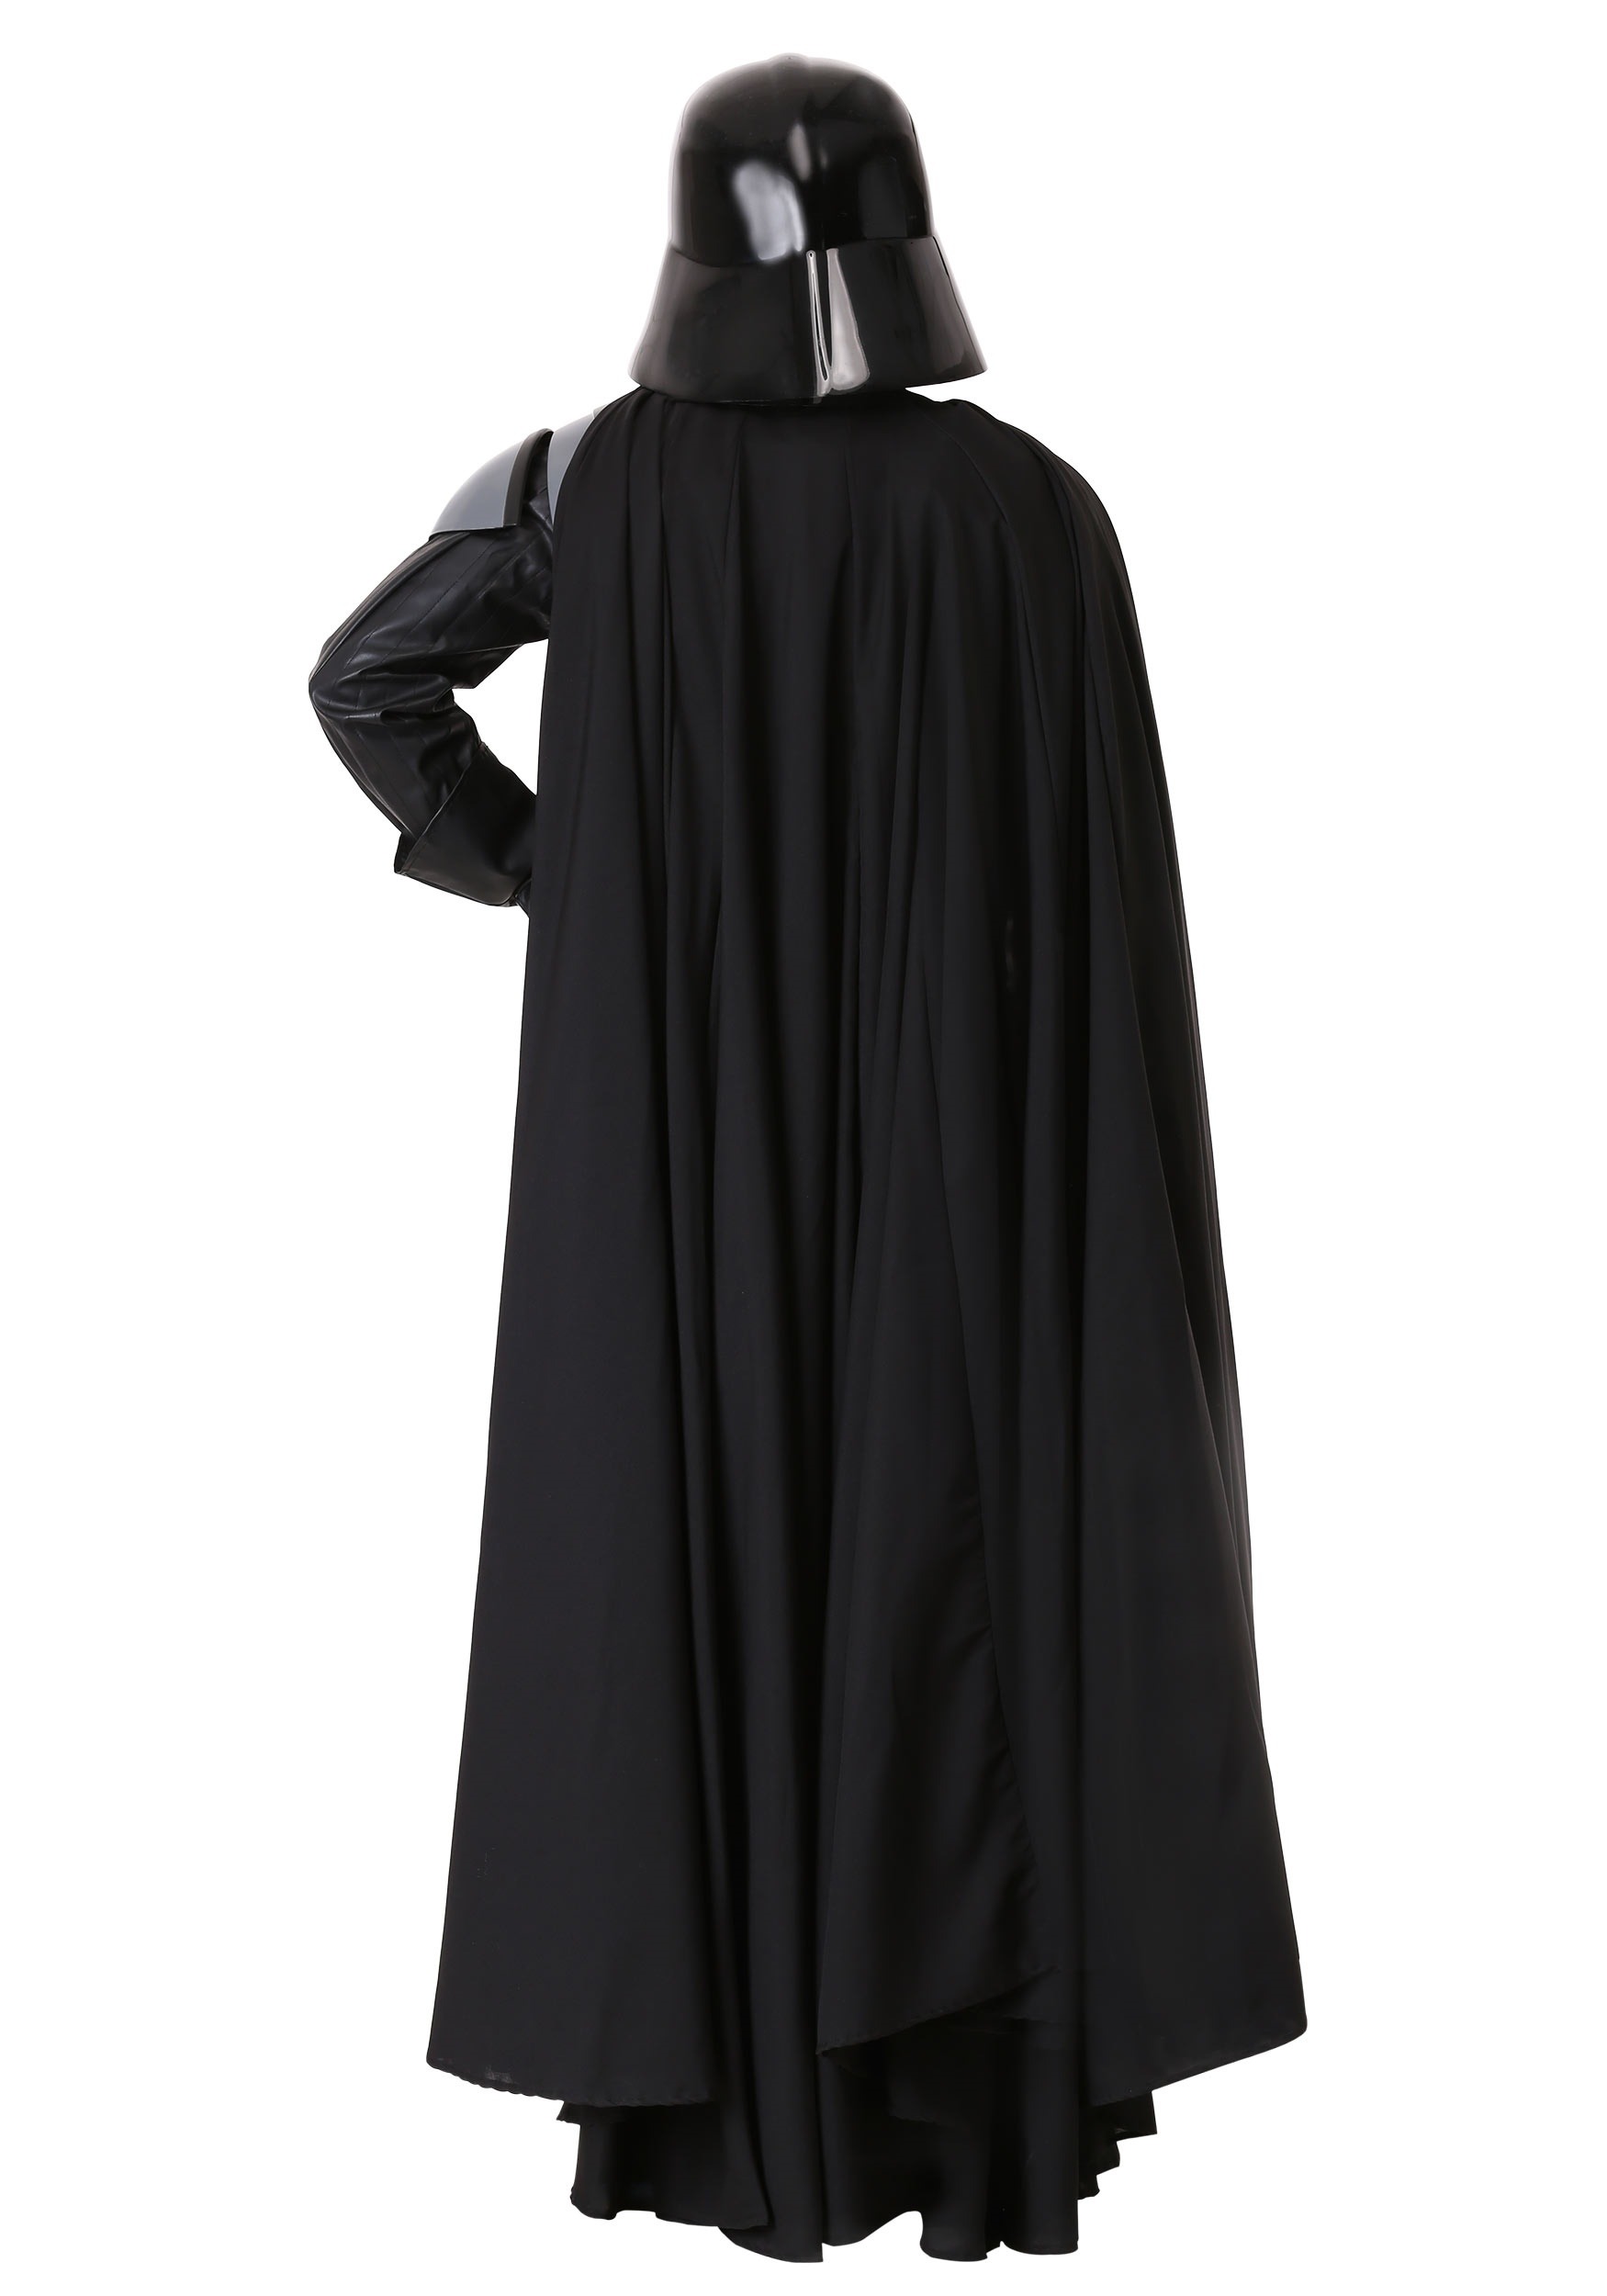 Authentic Darth Vader Costume Real Replica Offical Star Wars Costume